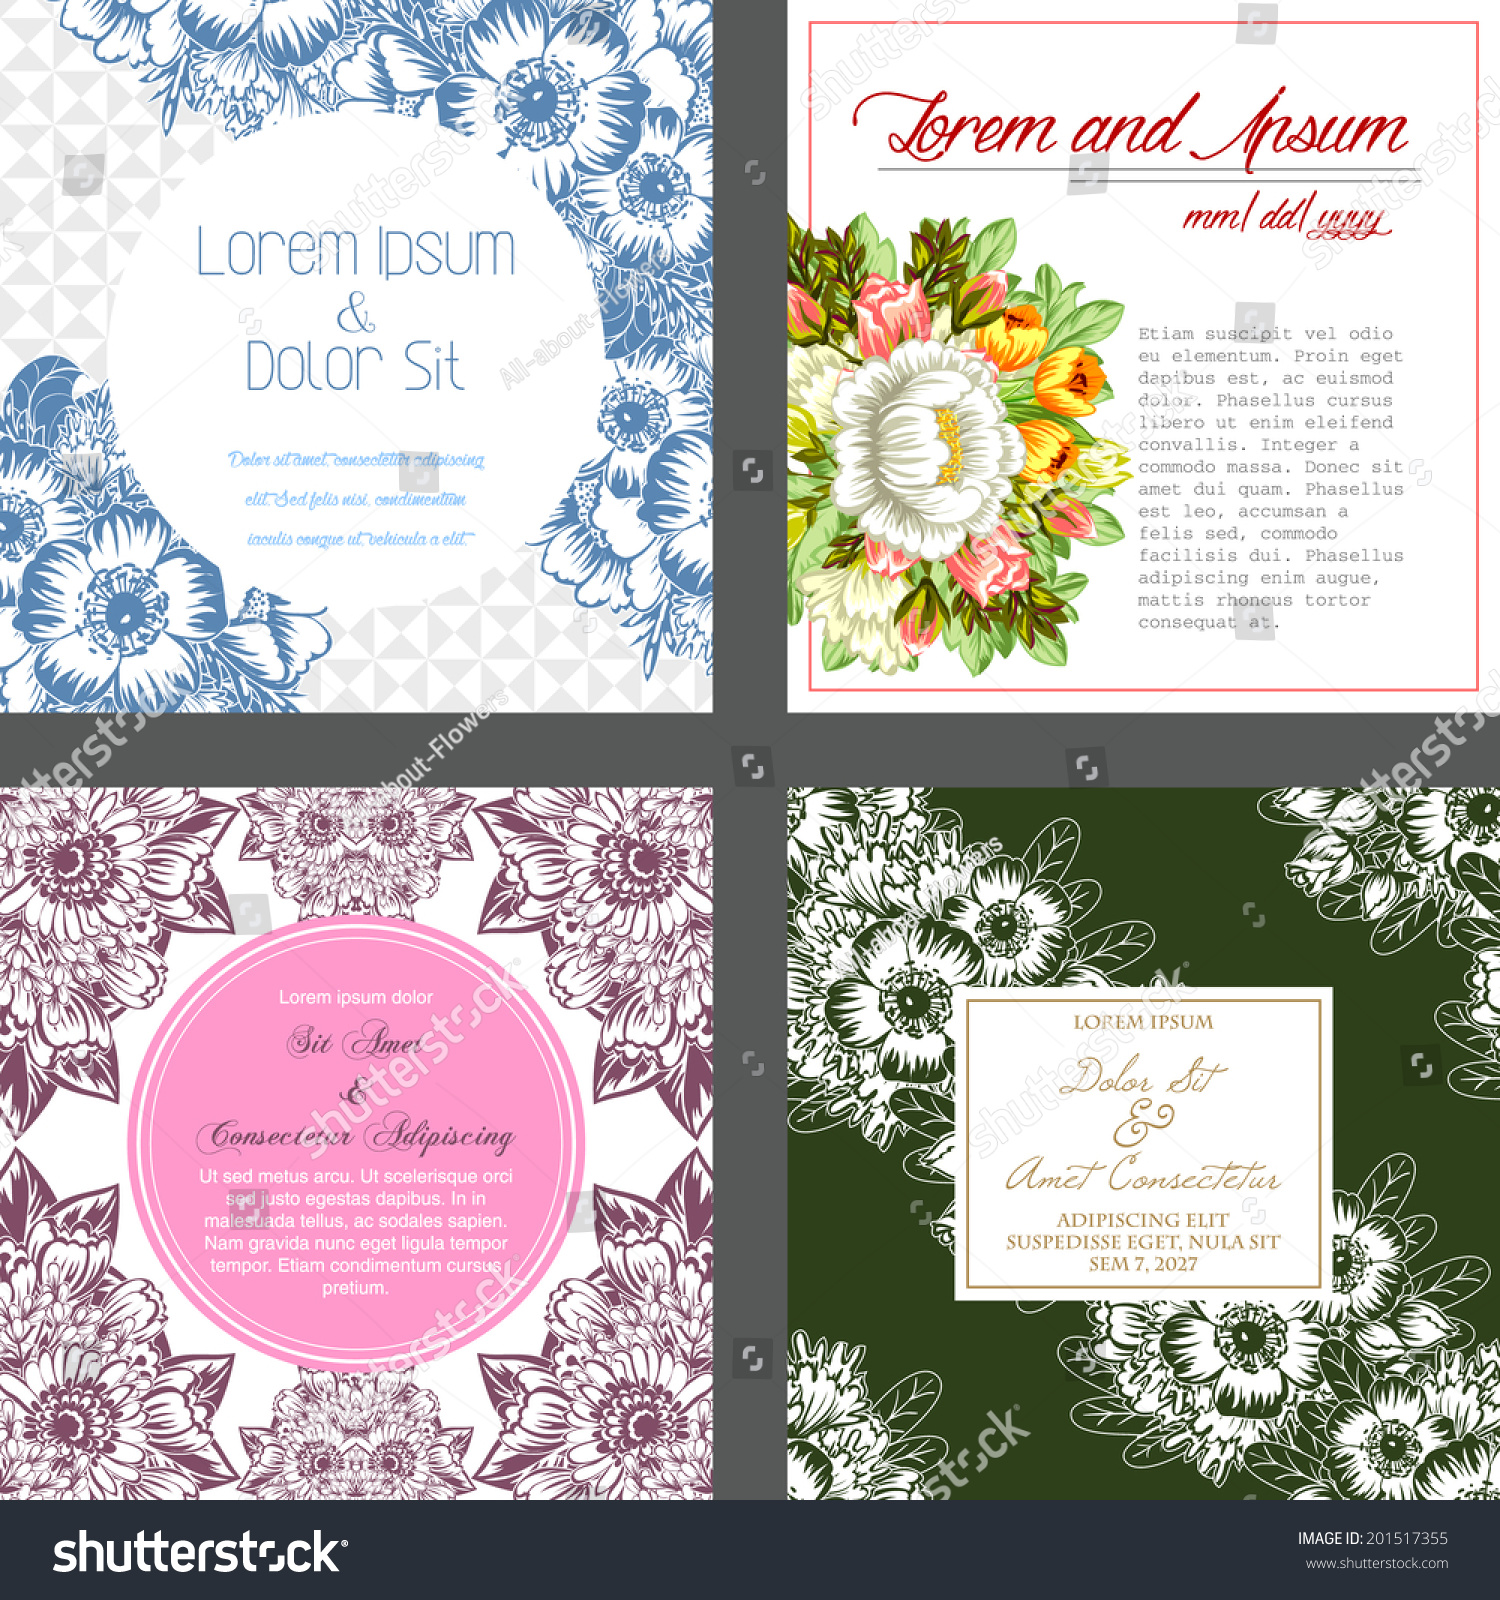 Wedding invitation cards with floral elements. #201517355